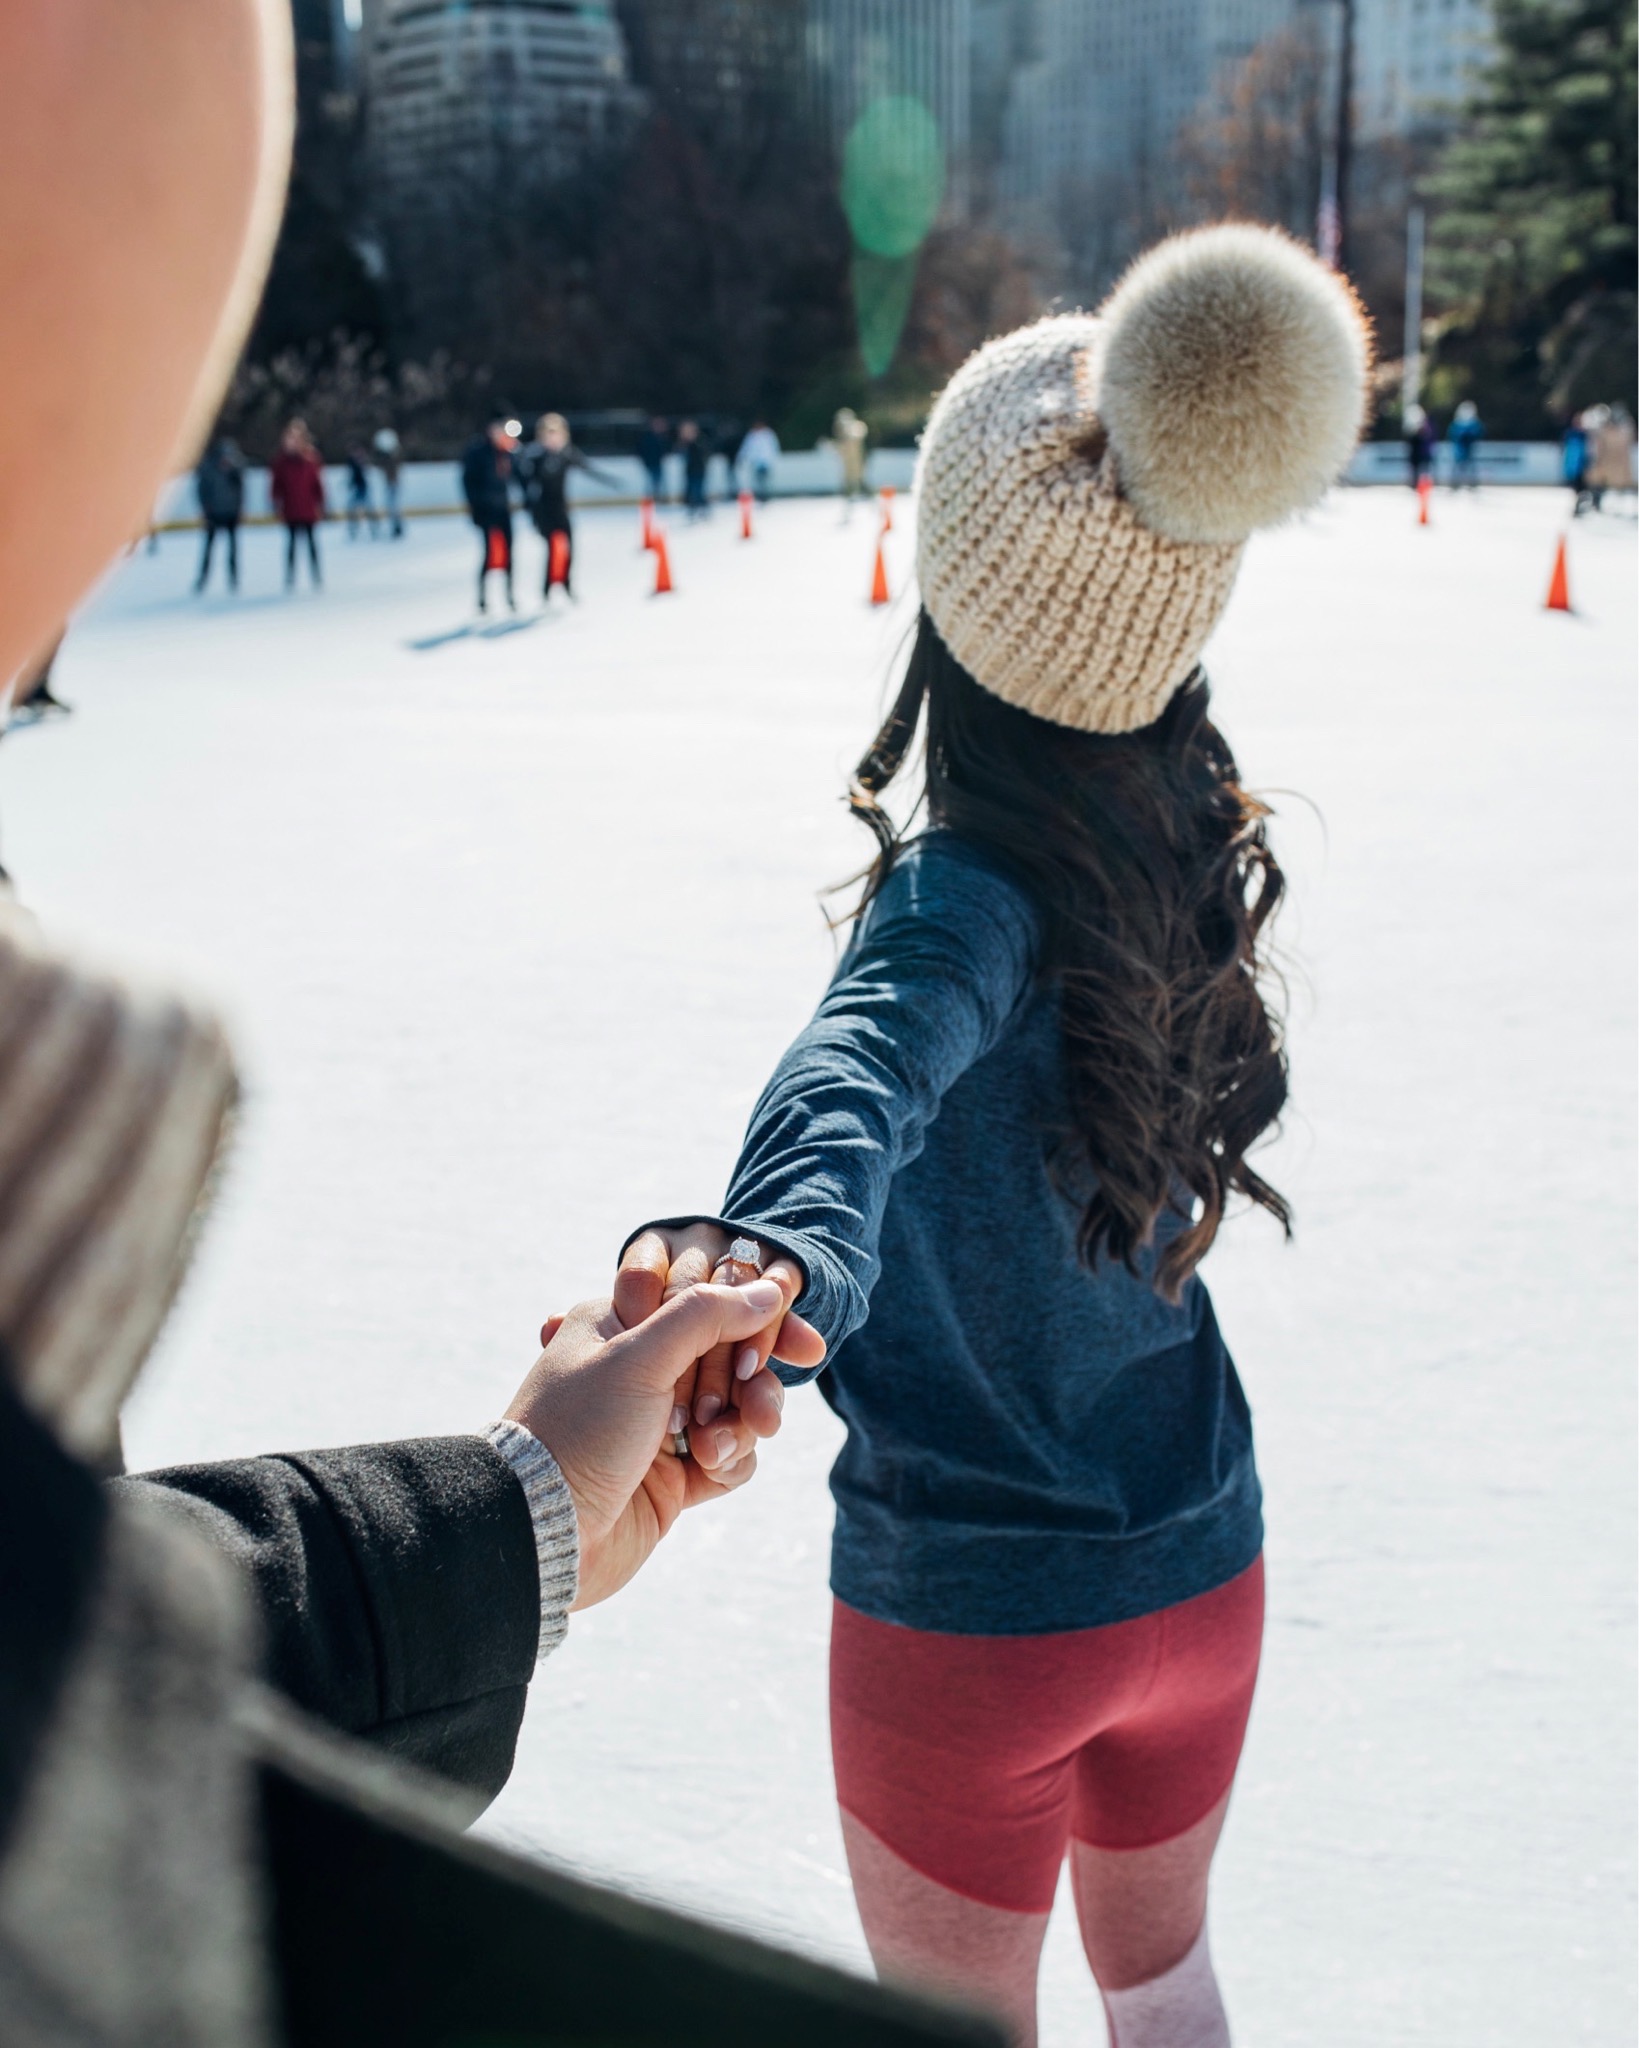 Cushion cut diamond engagement ring by James Allen during surprise proposal at central park